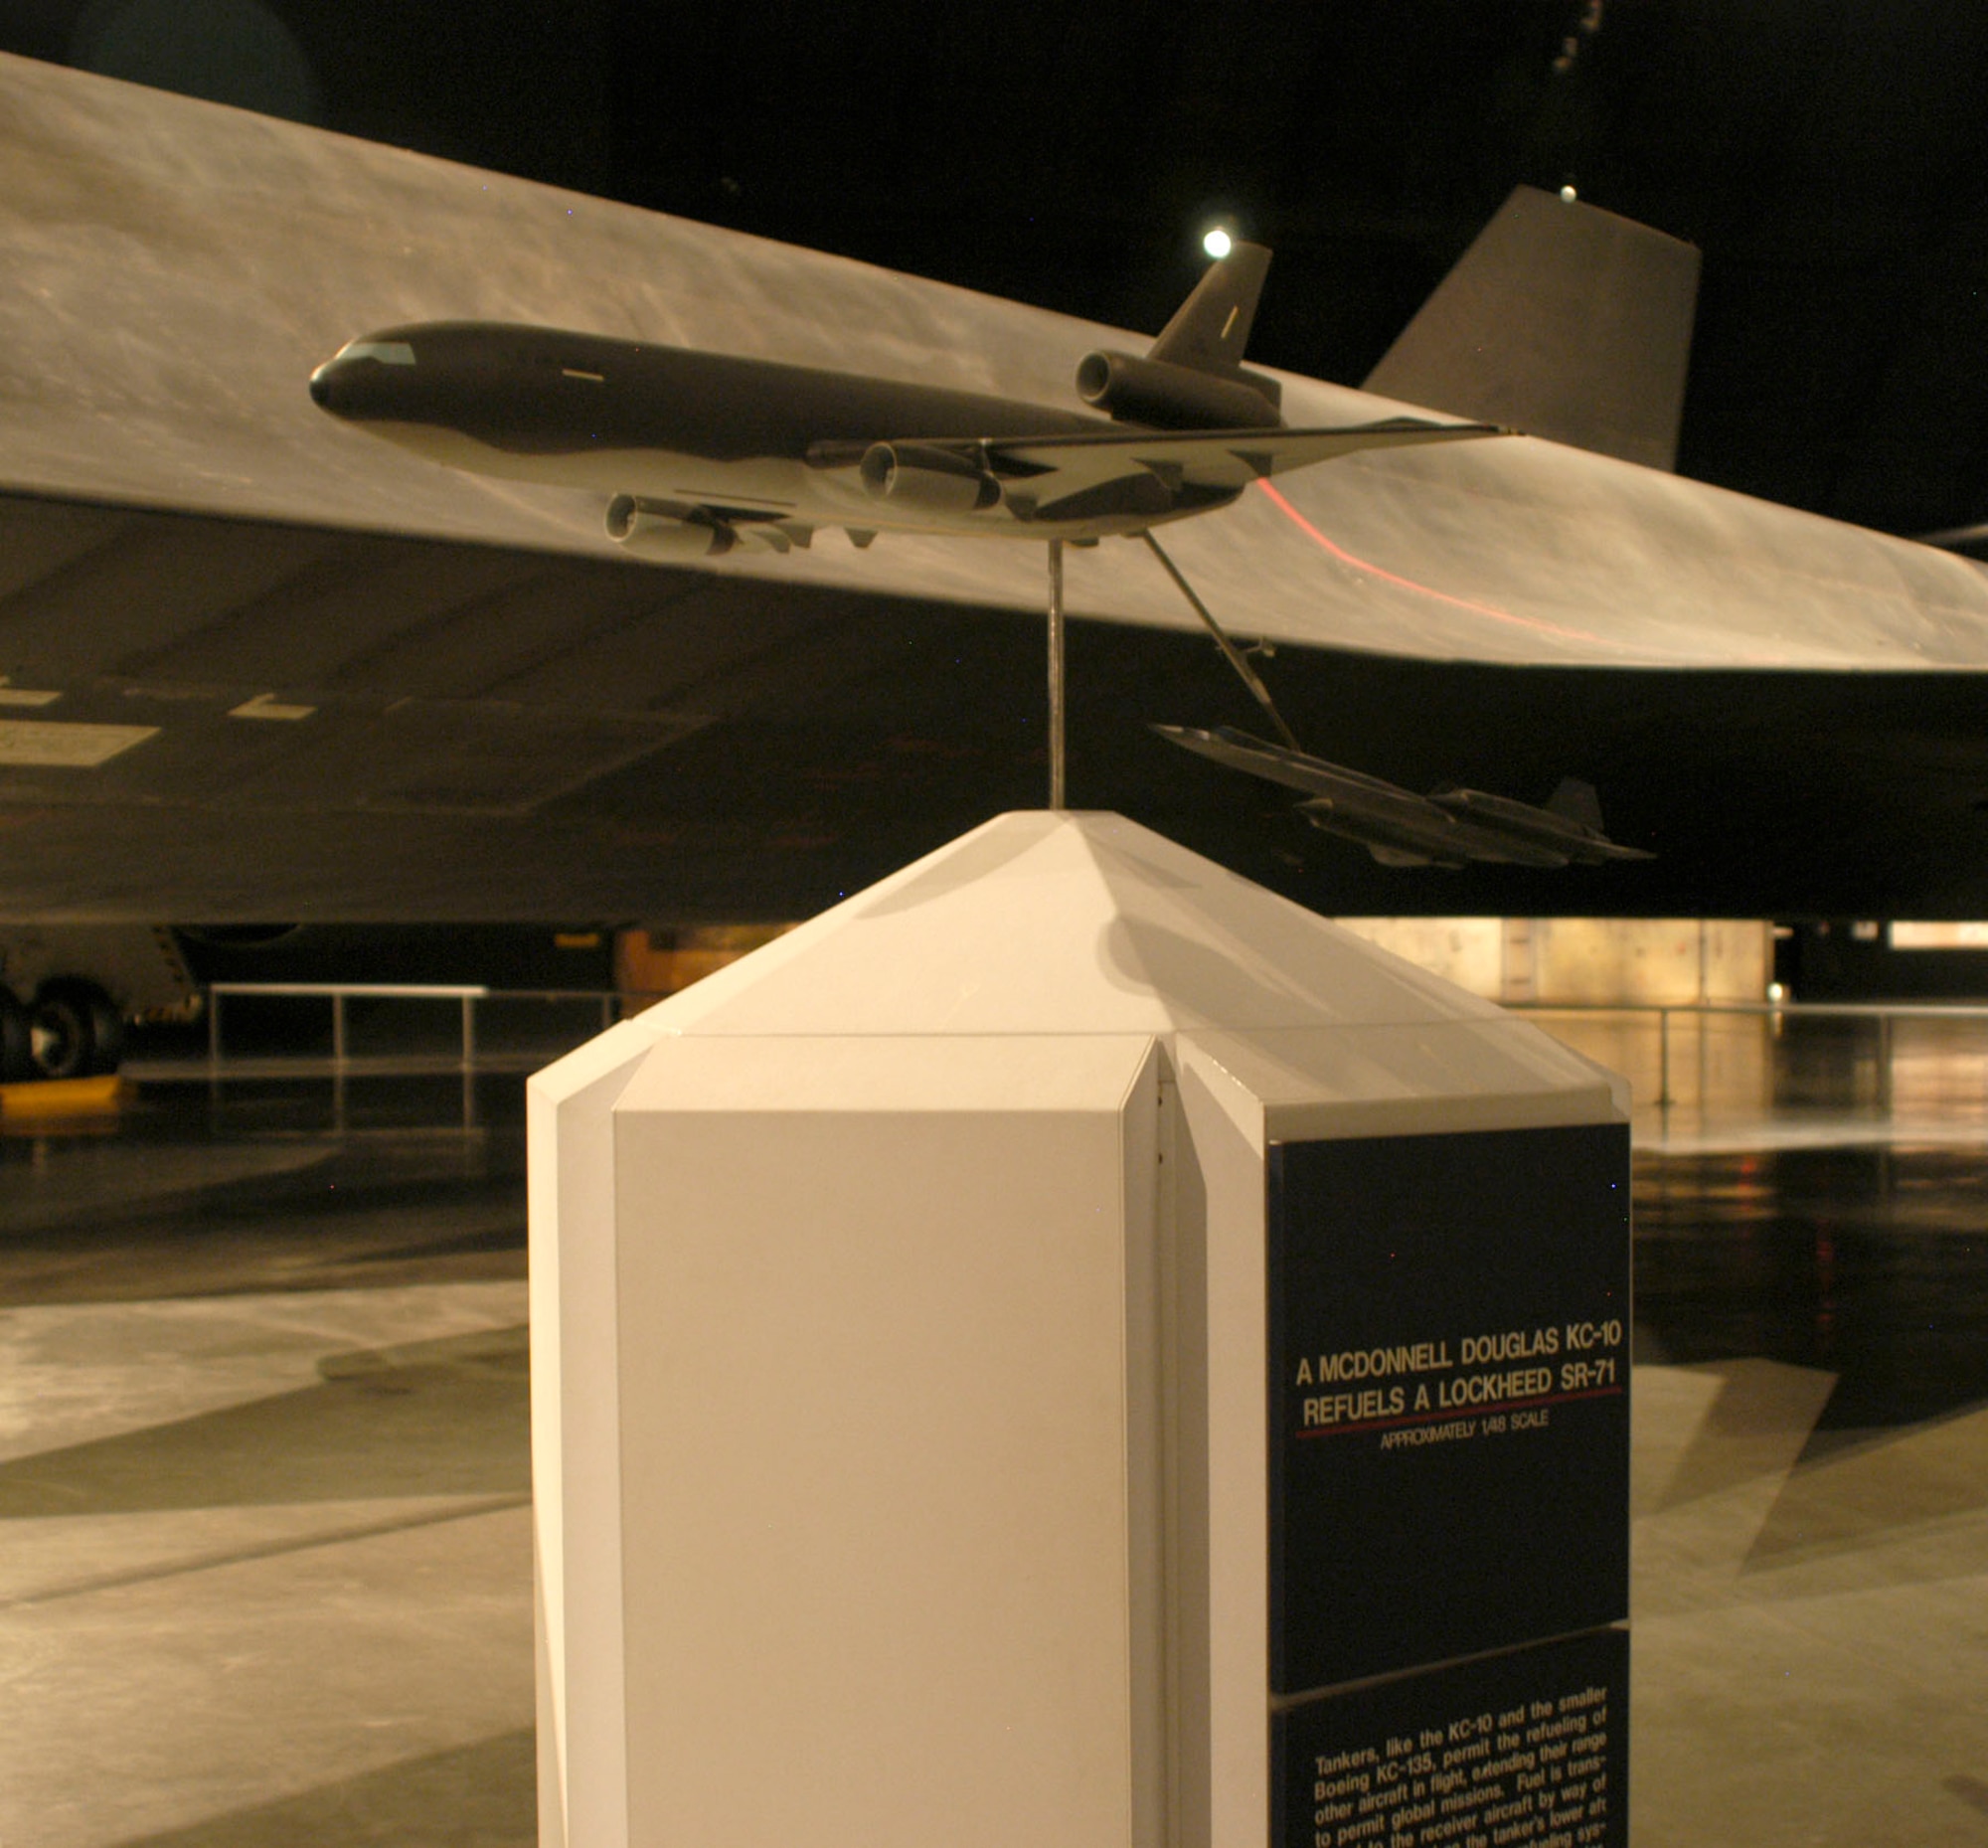 DAYTON, Ohio - Exhibit of a KC-10 refueling the SR-71 on display in the Cold War Gallery at the National Museum of the U.S. Air Force. (U.S. Air Force photo)